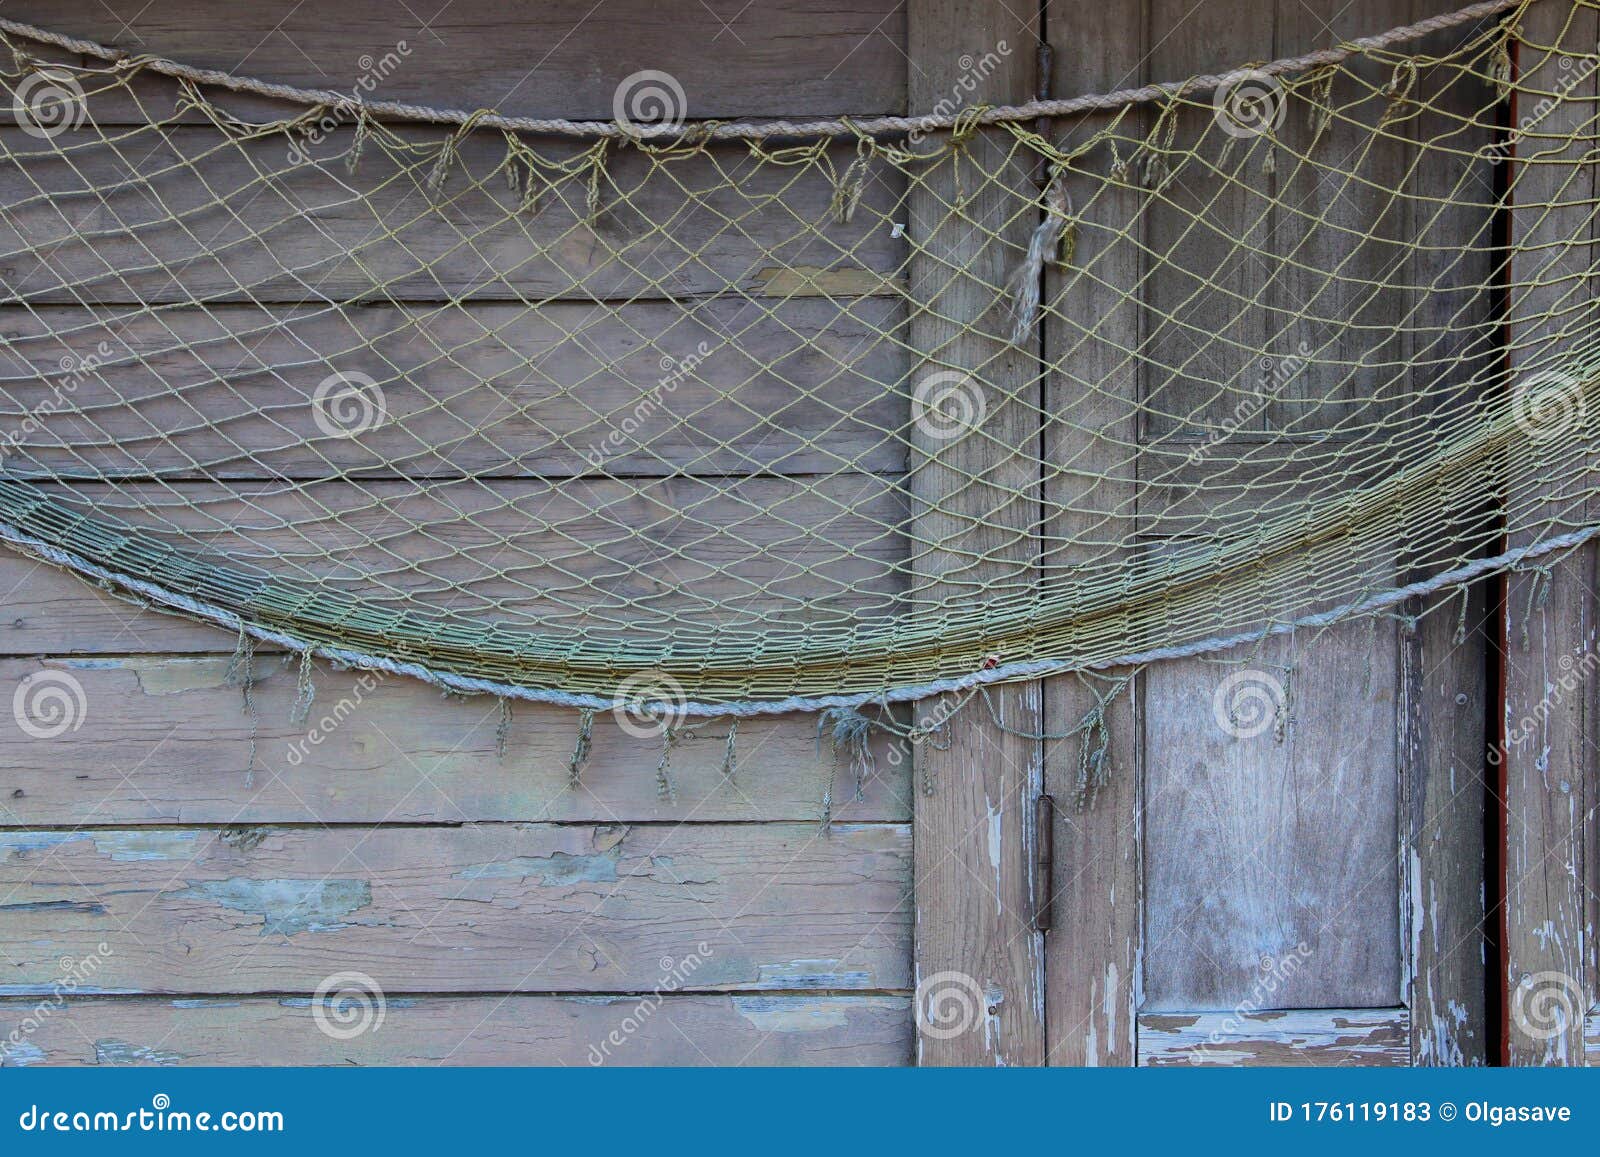 https://thumbs.dreamstime.com/z/fishnet-hanging-wooden-wall-abstract-sea-life-background-fishing-net-over-closed-storm-window-176119183.jpg